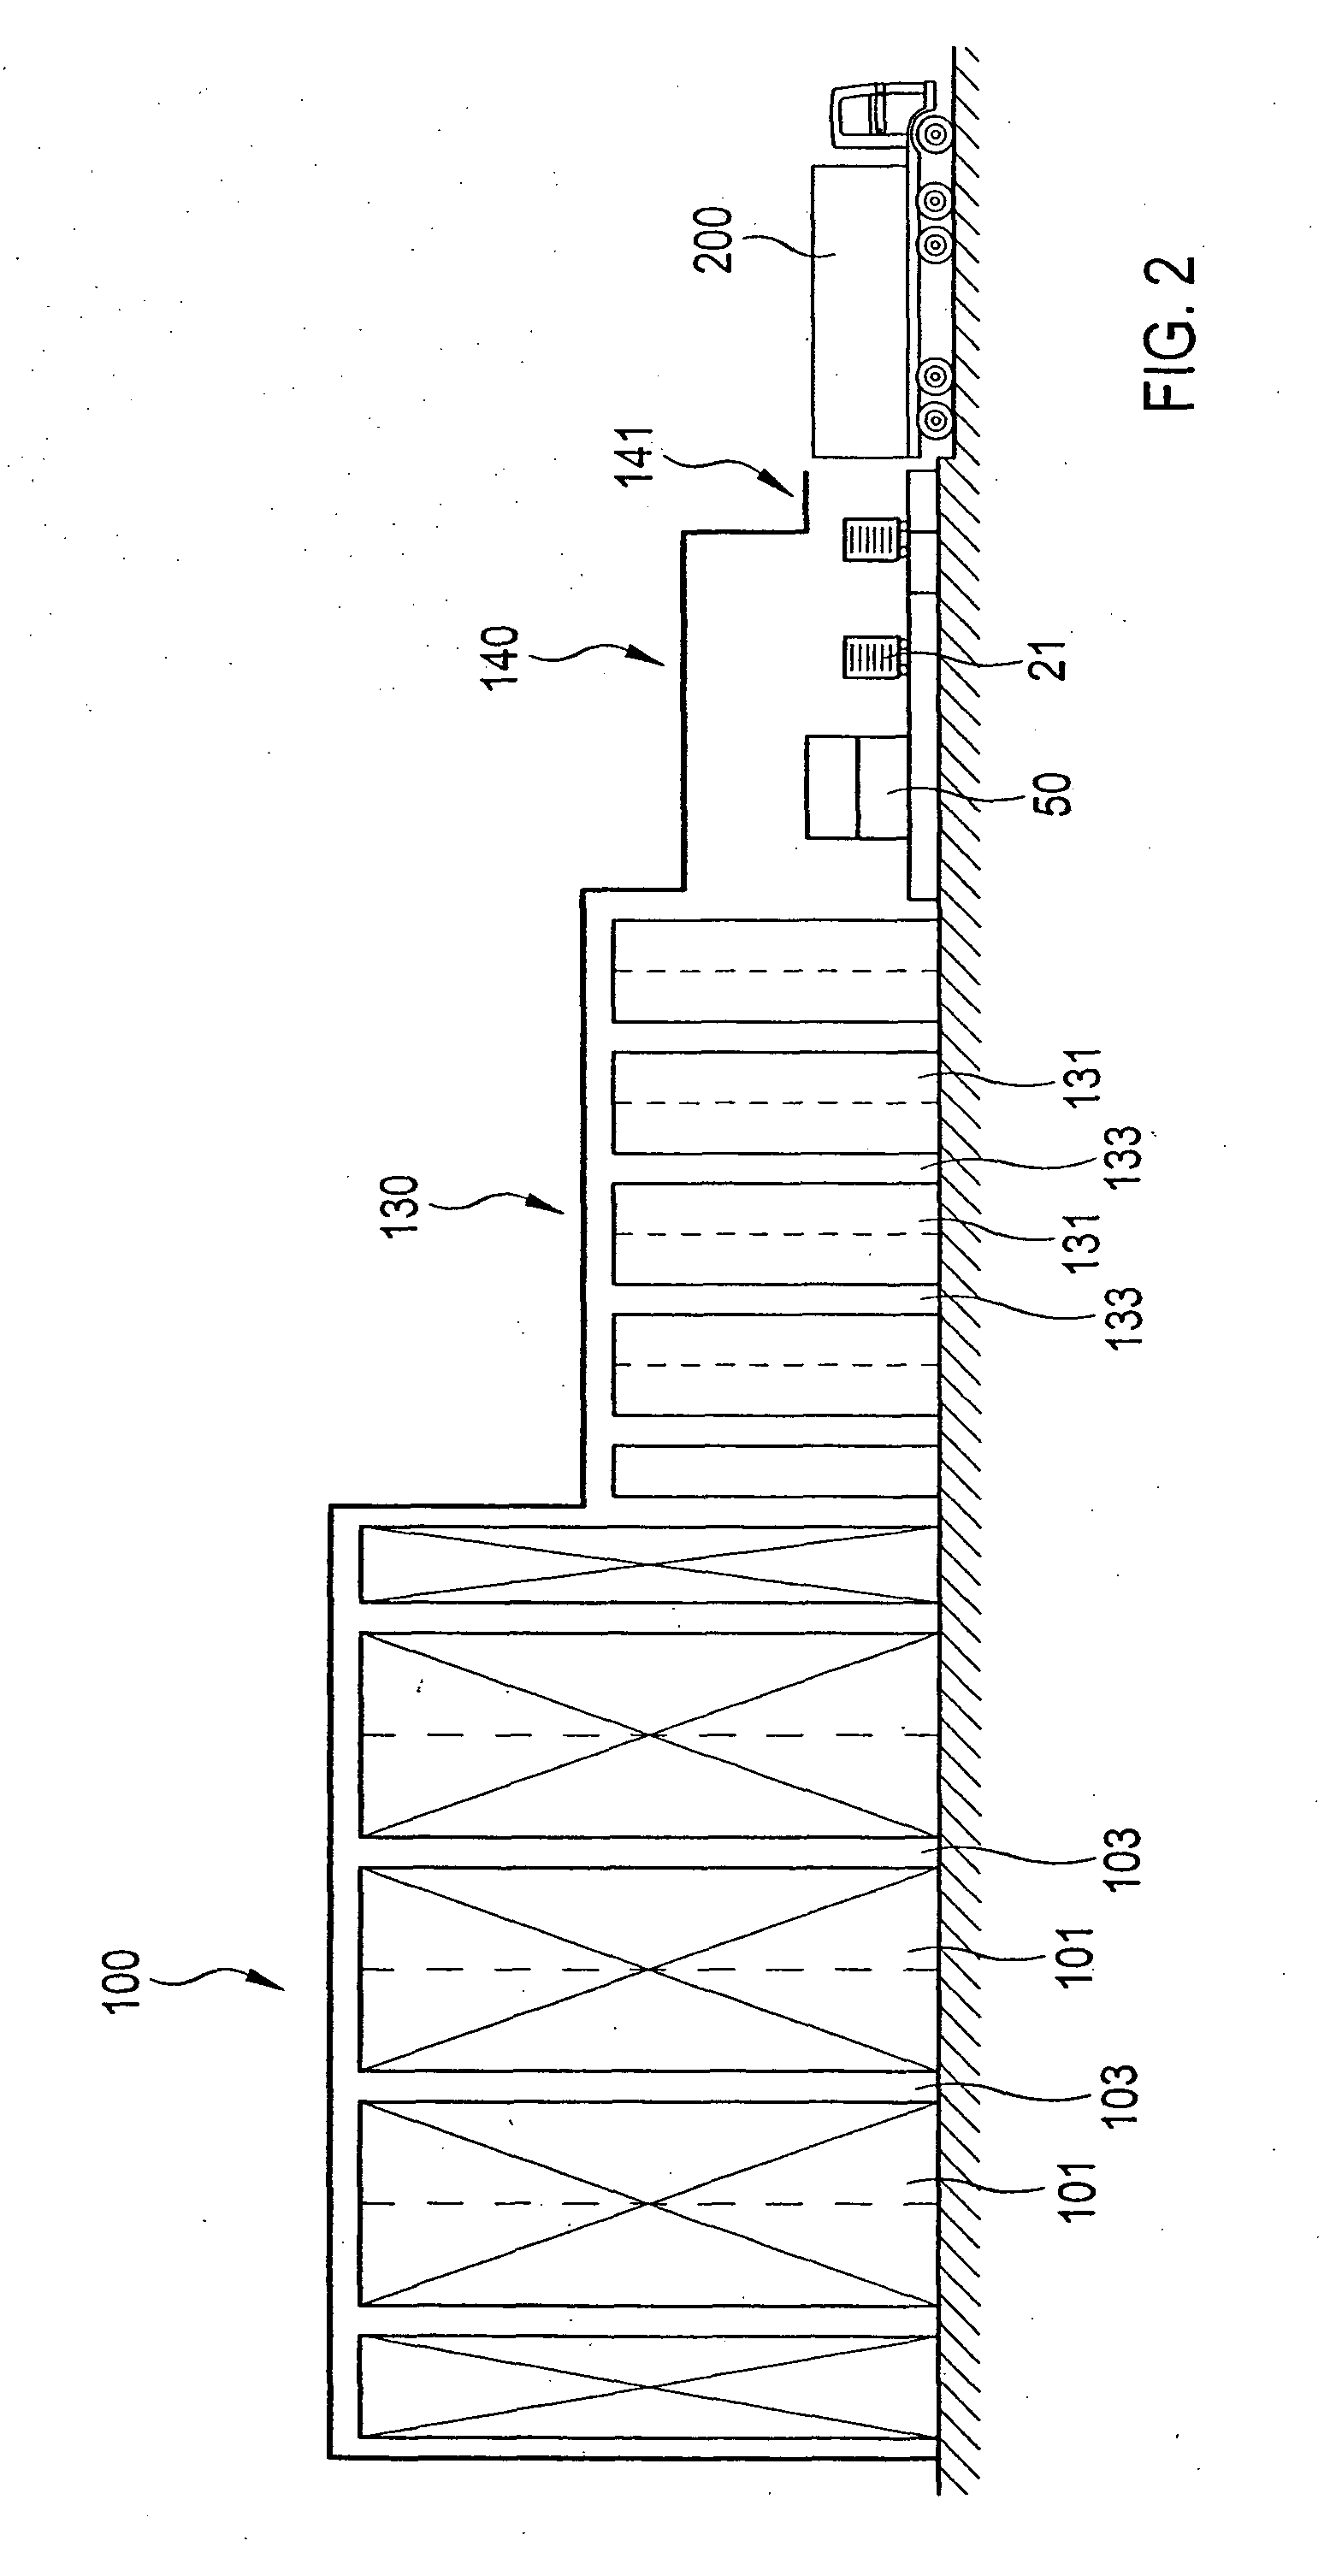 Automated system and method of storing and picking articles